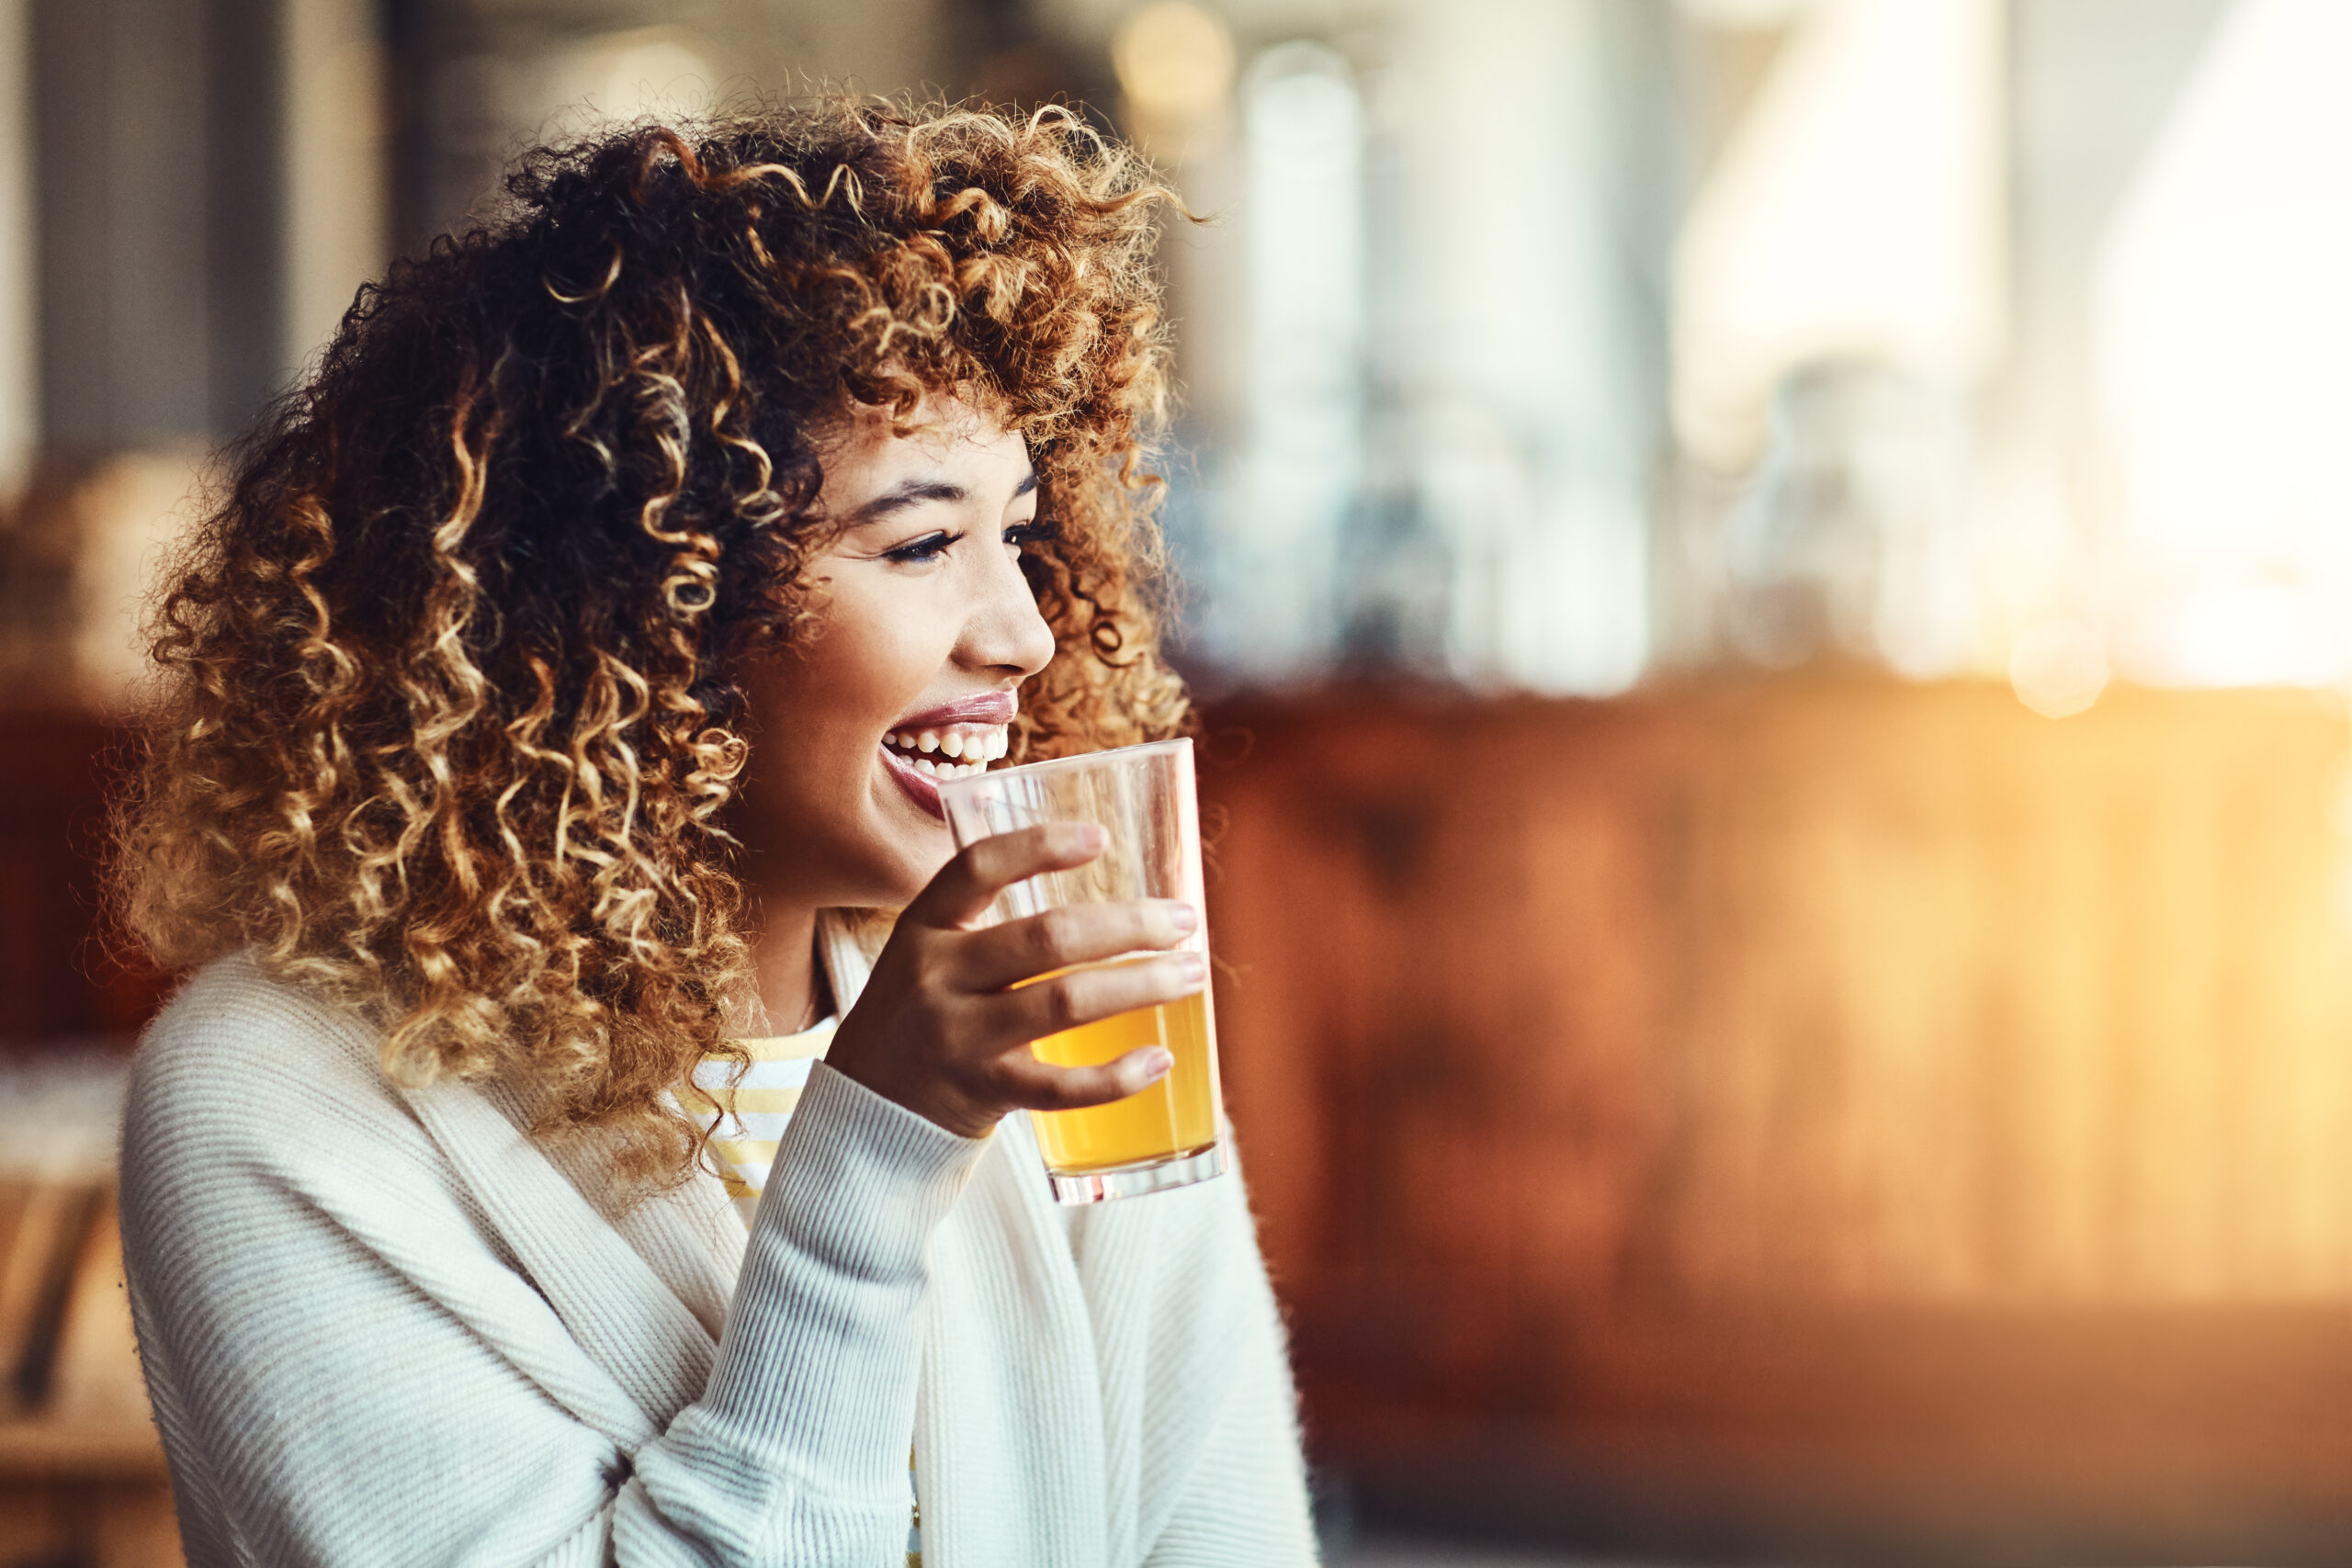 Image of a your woman holding a beer and smiling.